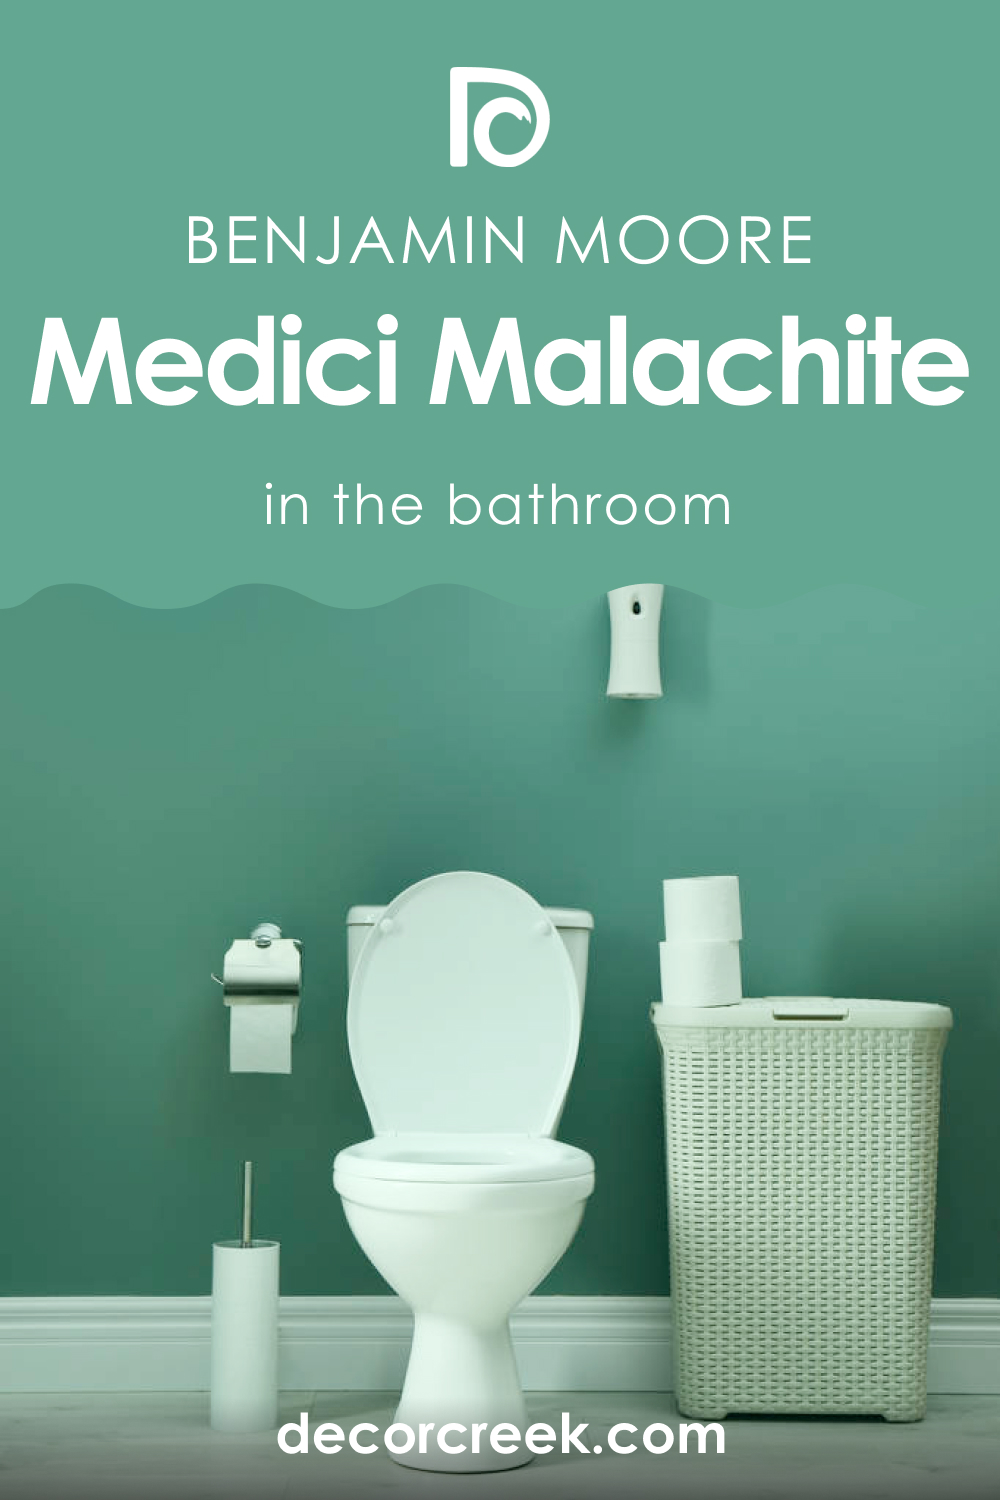 How to Use Medici Malachite 600 in the Bathroom?